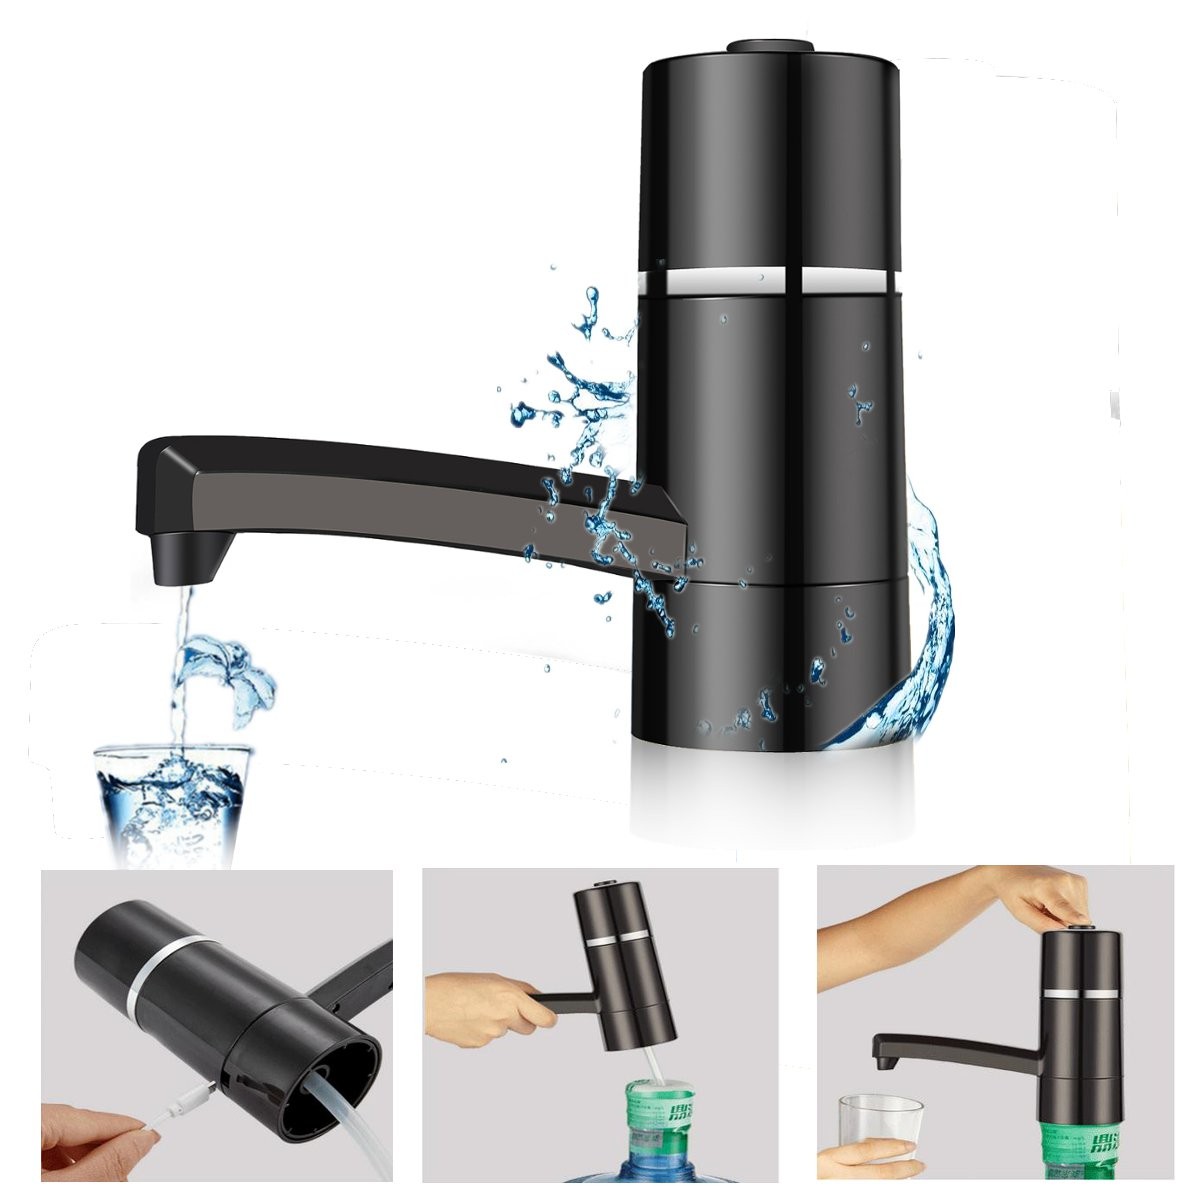 12V-15W-Water-Electric-Pump-Dispenser-Wireless-Rechargeable-Portable-Tools-1191150-3